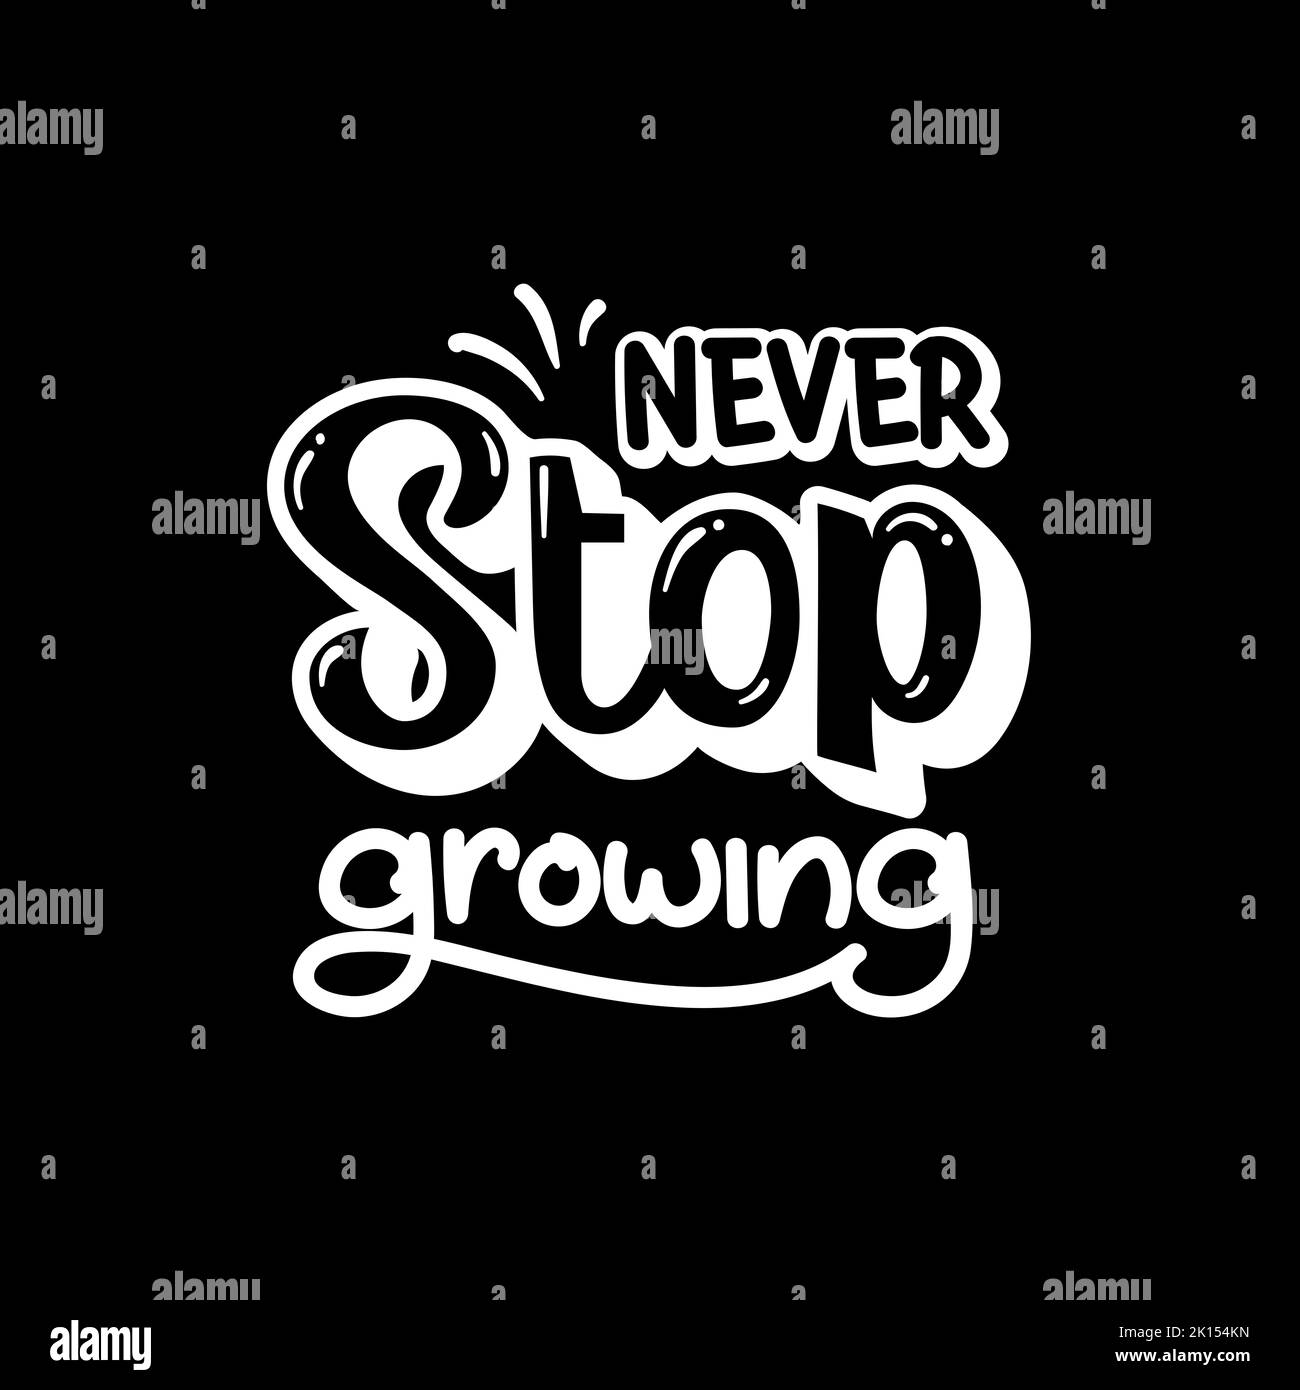 Motivational Typographic Quote - never stop growing. Motivational Quote Stock Photo